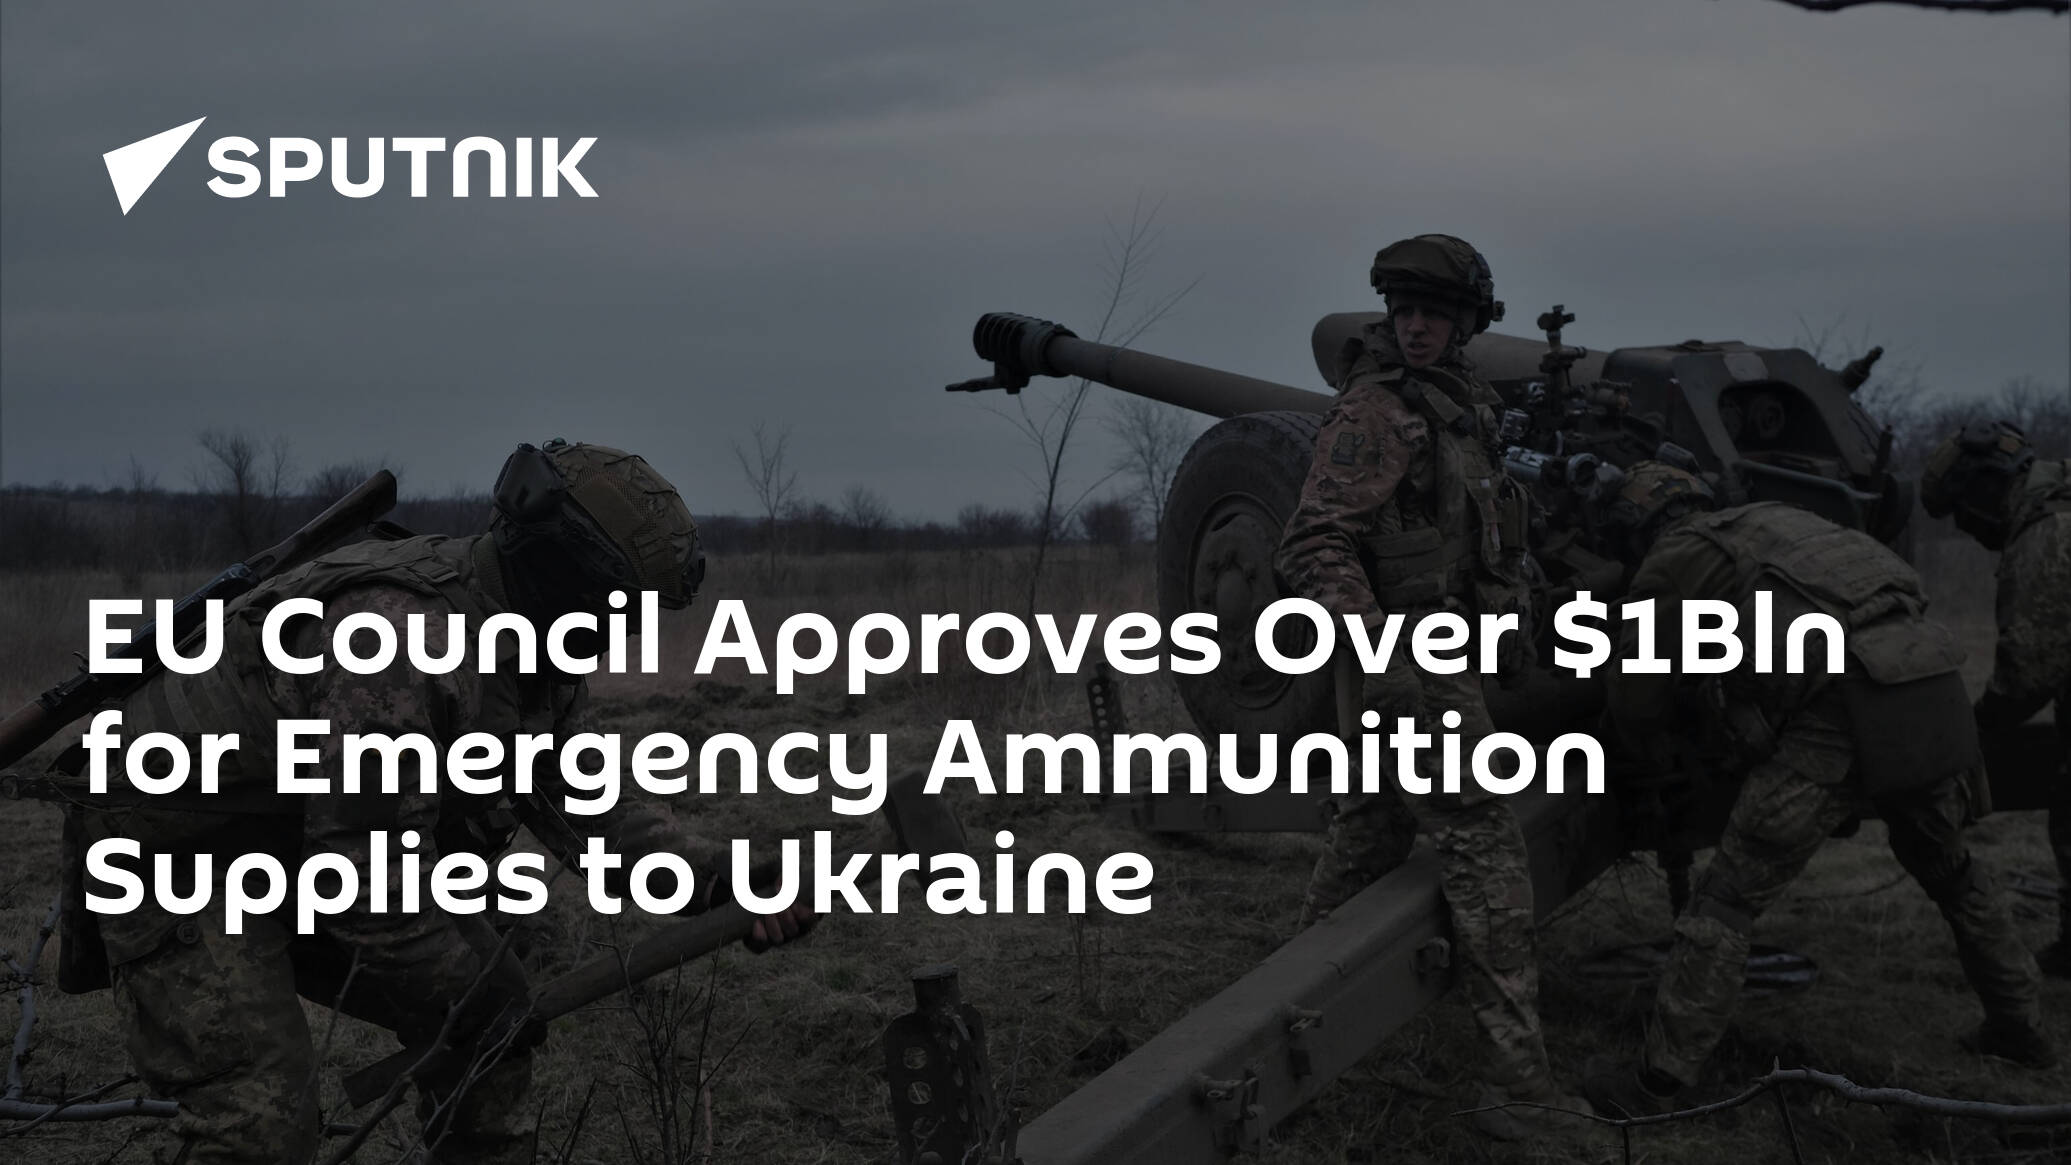 EU Council Approves Over Bln for Emergency Ammunition Supplies to Ukraine